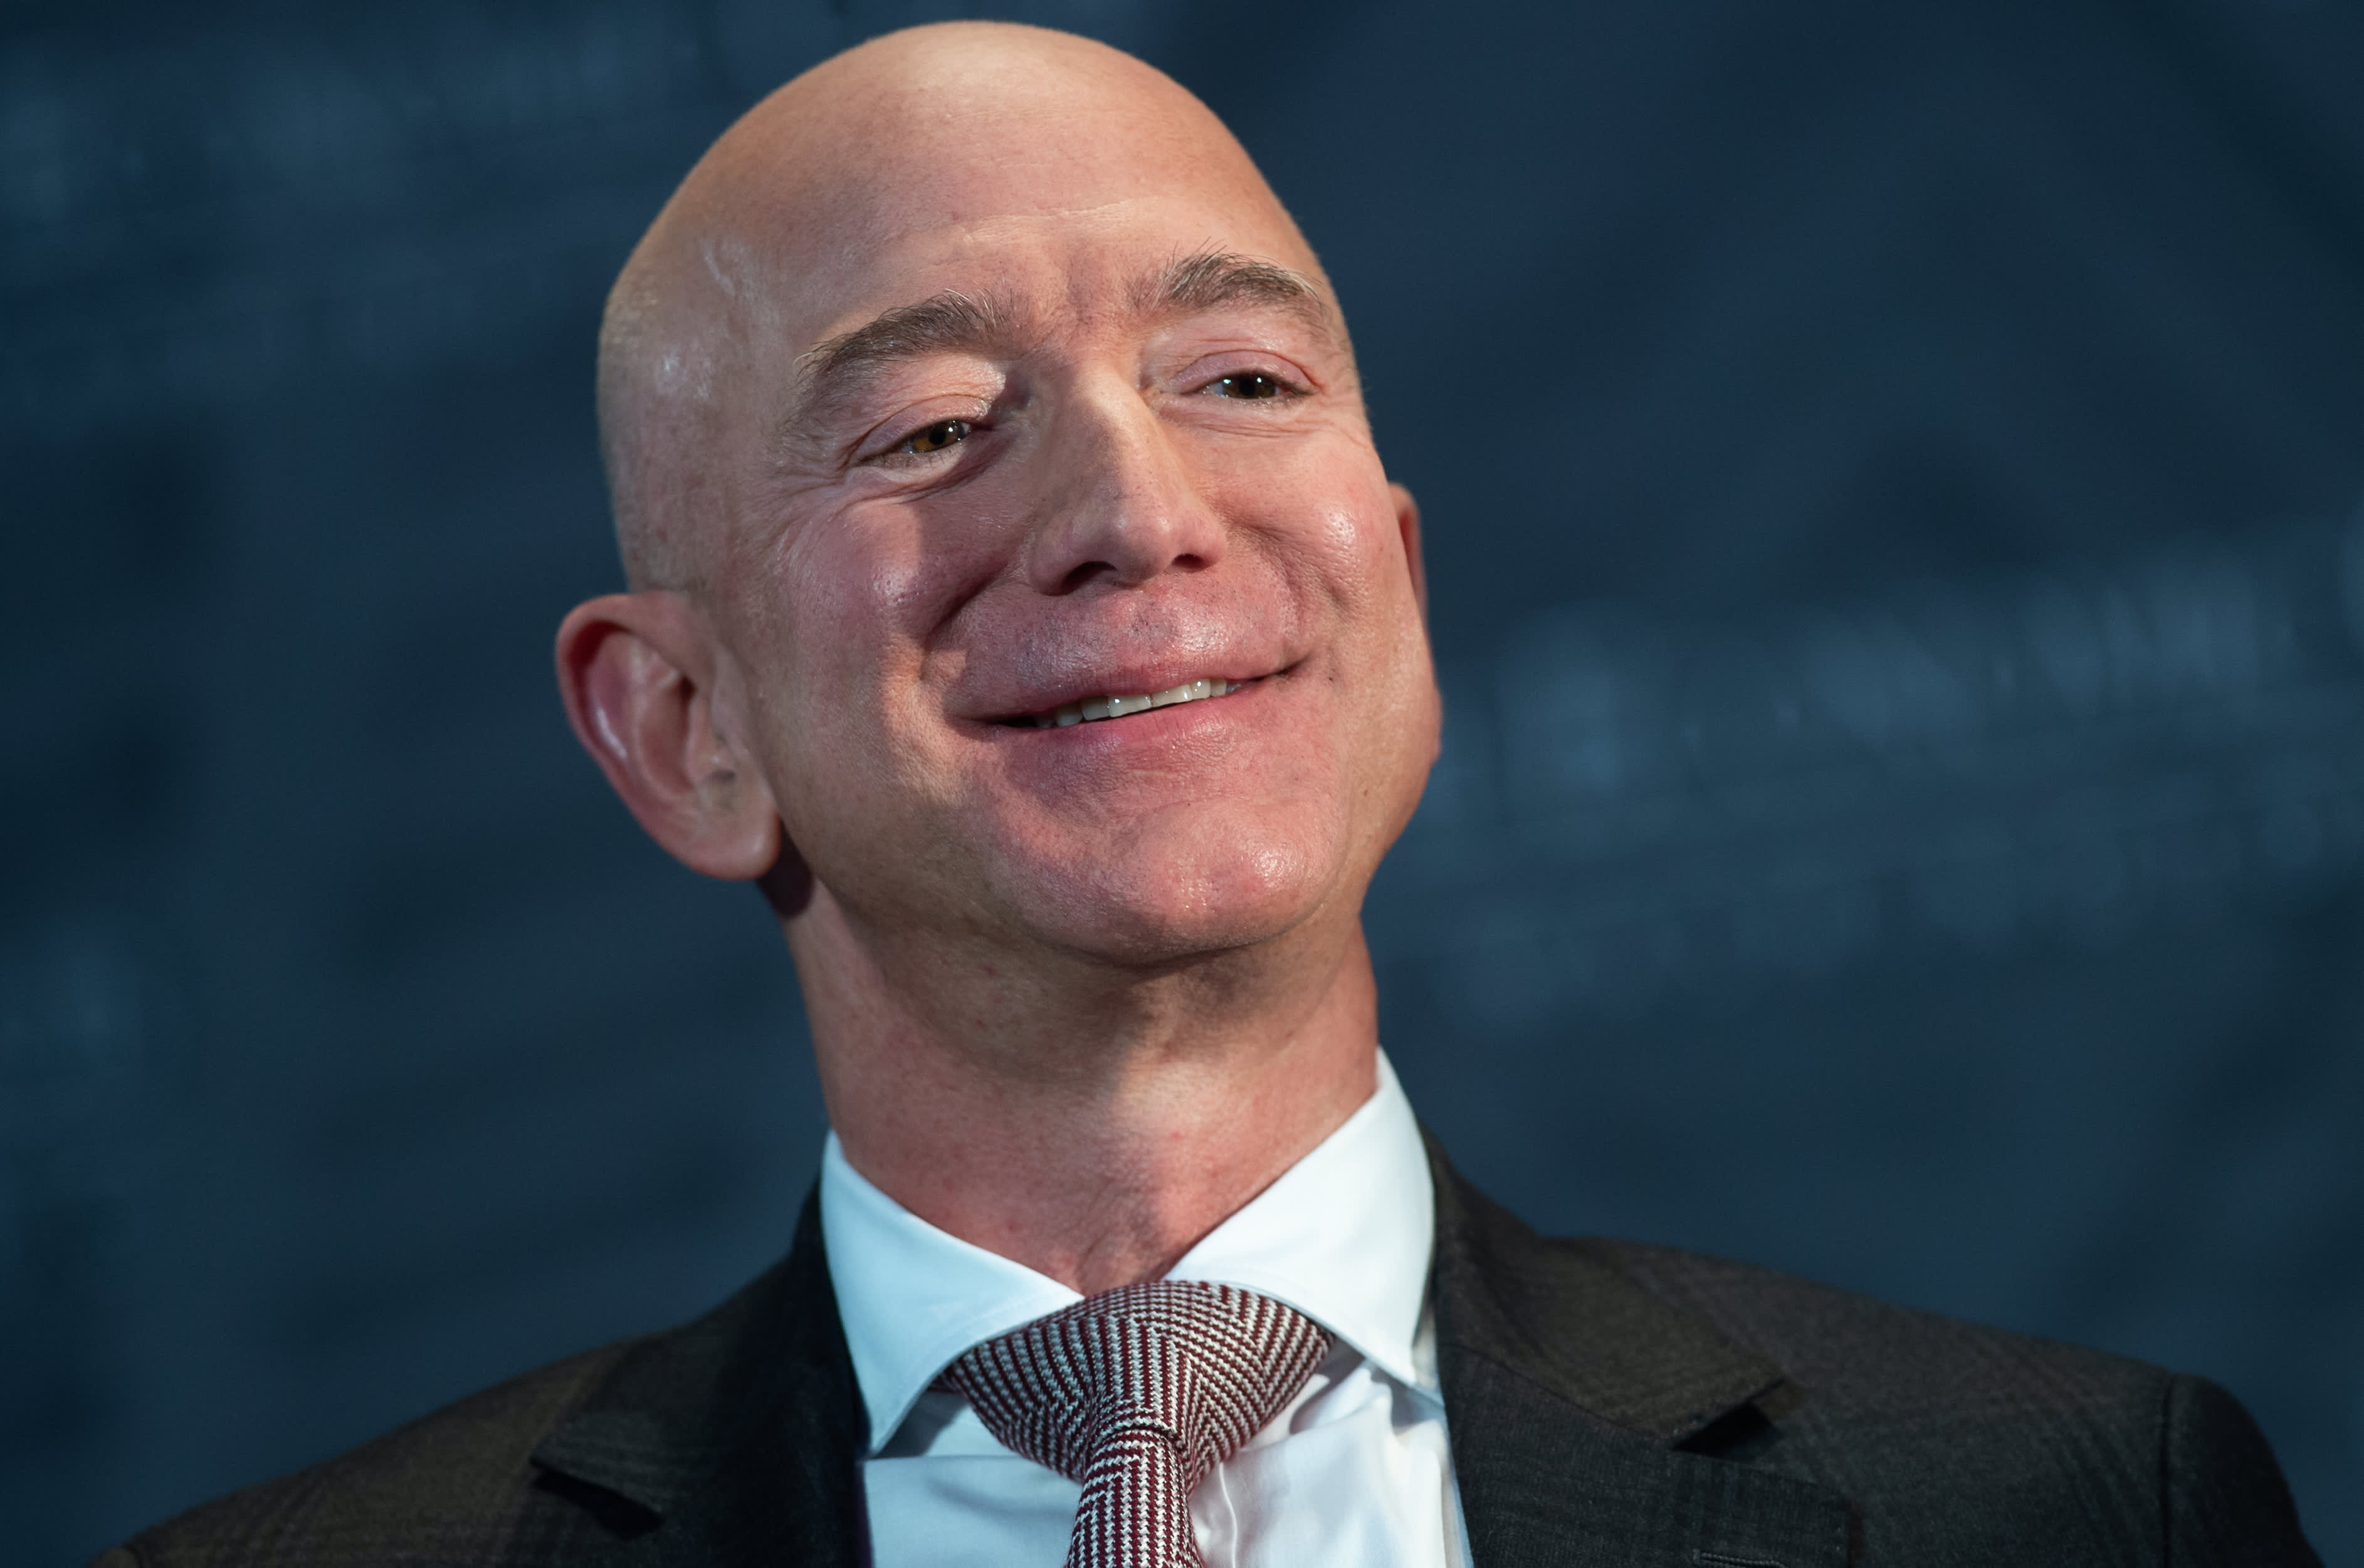 Jeff Bezos claims Elon Musk’s place as the richest person in the world